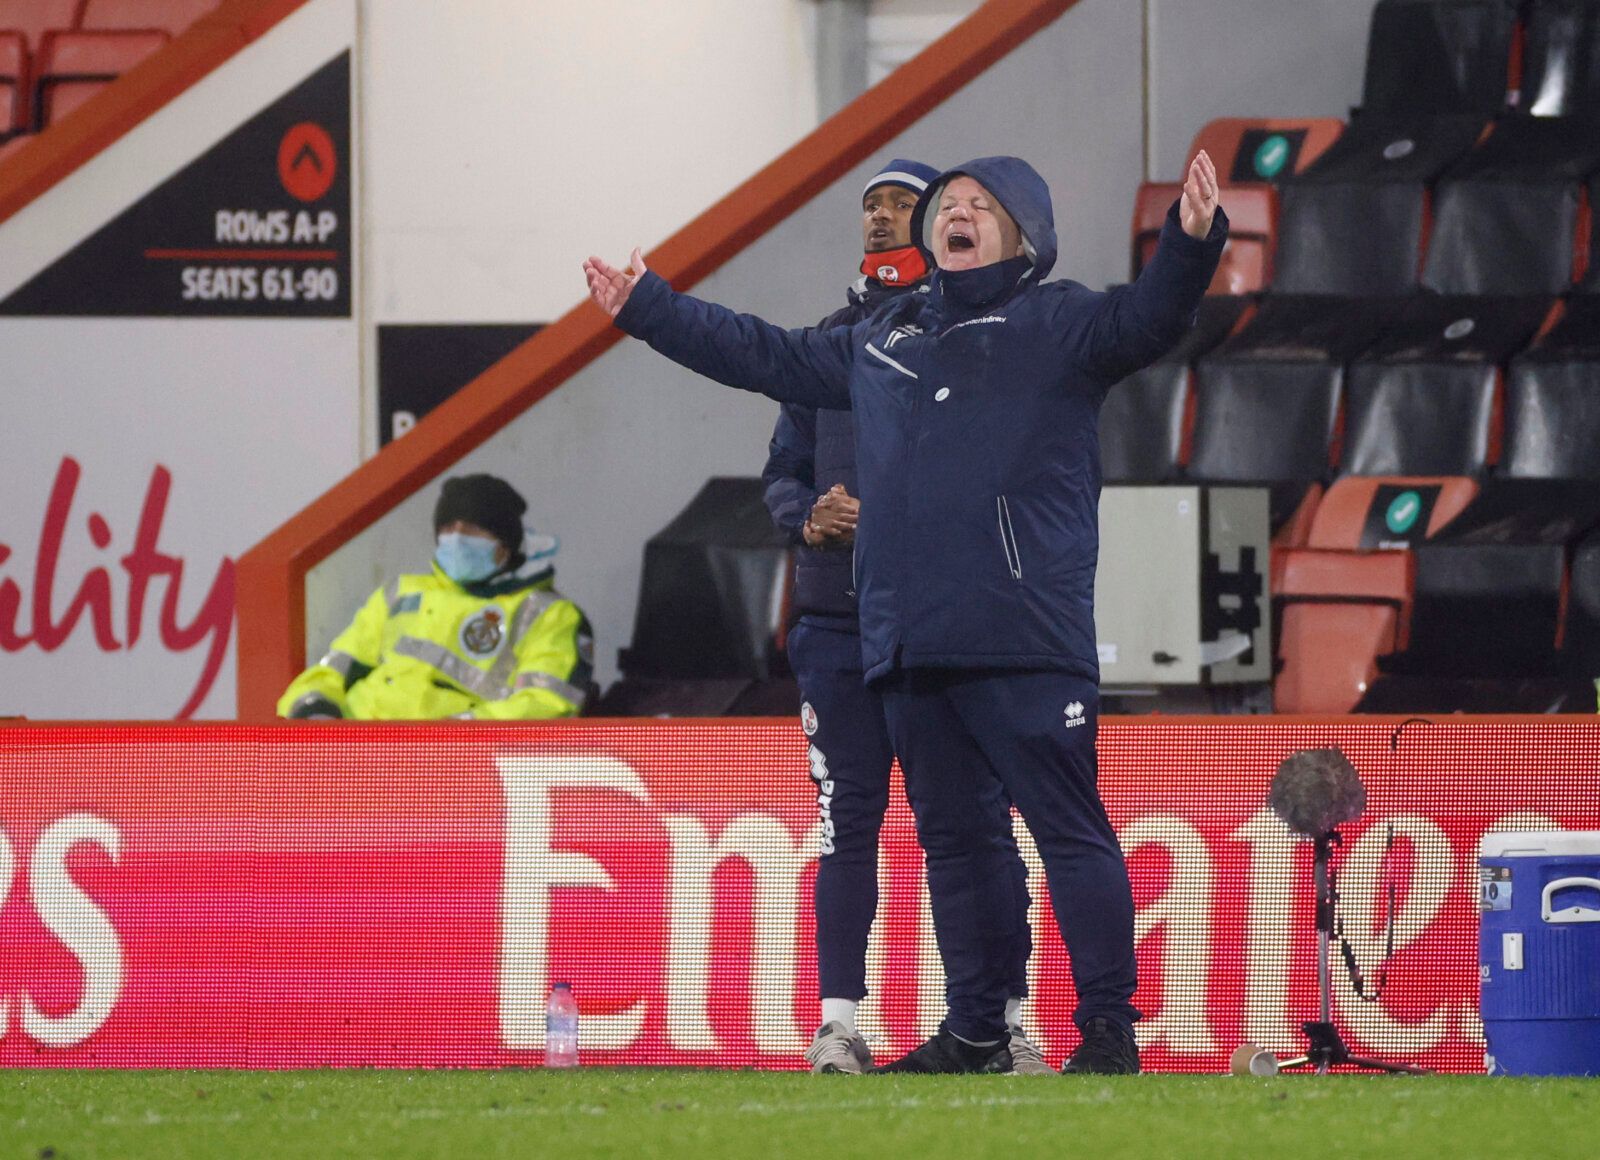 Soccer Football - FA Cup - Fourth Round - AFC Bournemouth v Crawley Town - Vitality Stadium, Bournemouth, Britain - January 26, 2021 Crawley Town's manager John Yems reacts Action Images/John Sibley